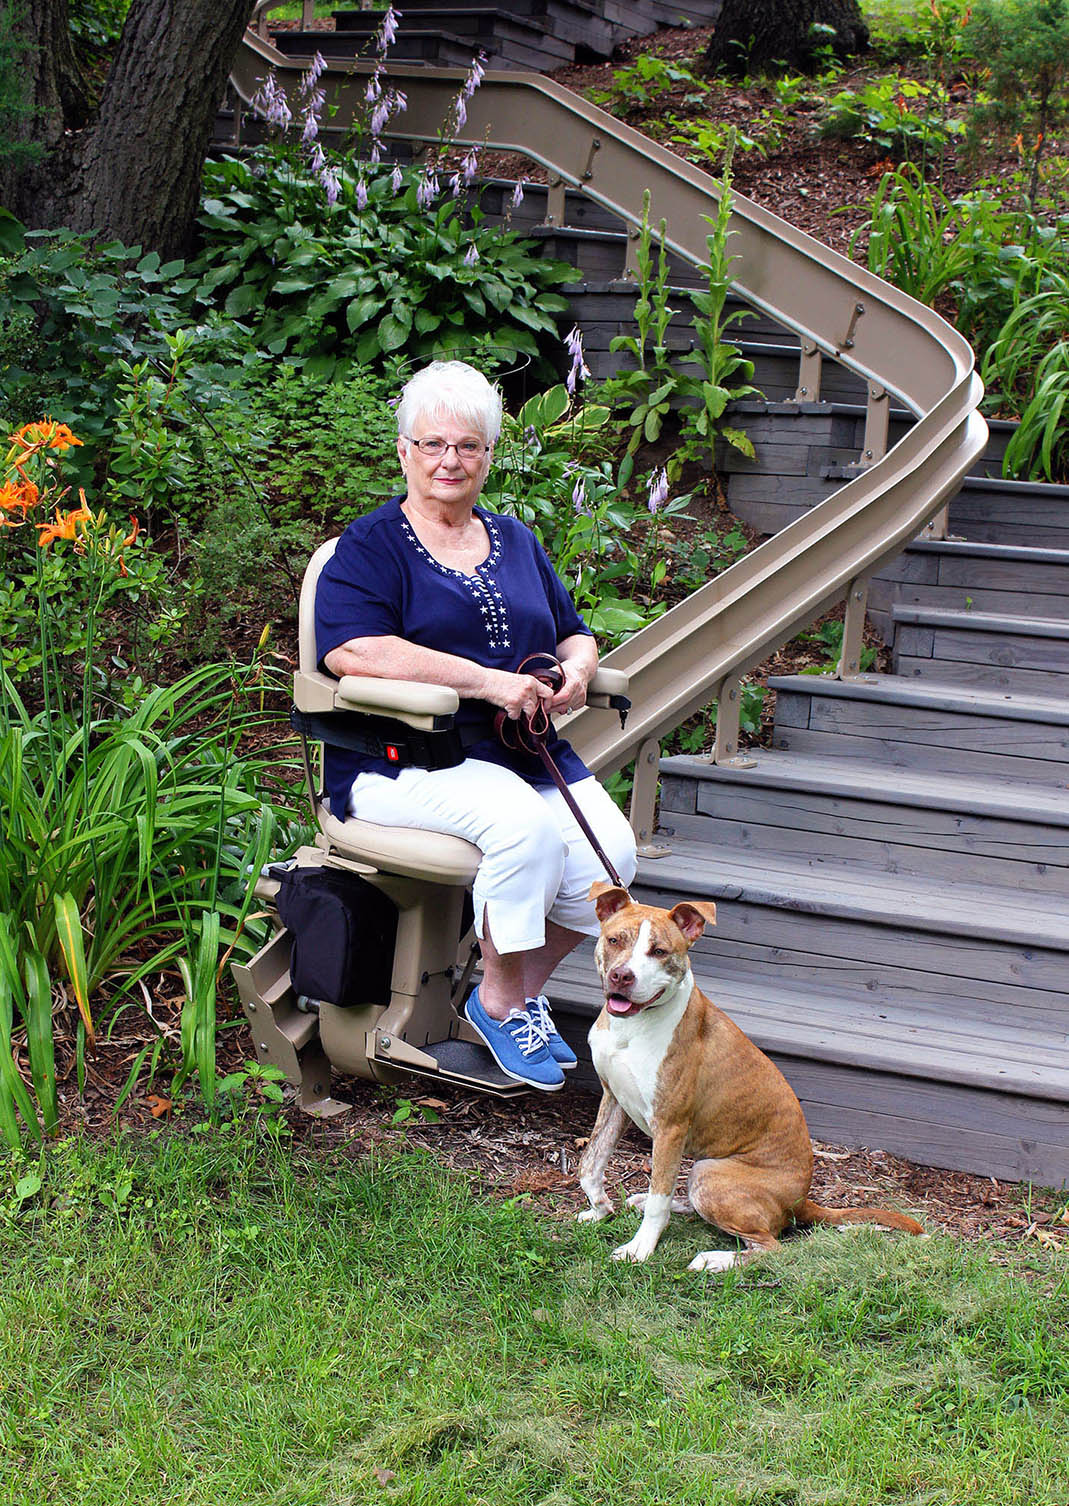 Elite Outdoor Curved stairlift with dog